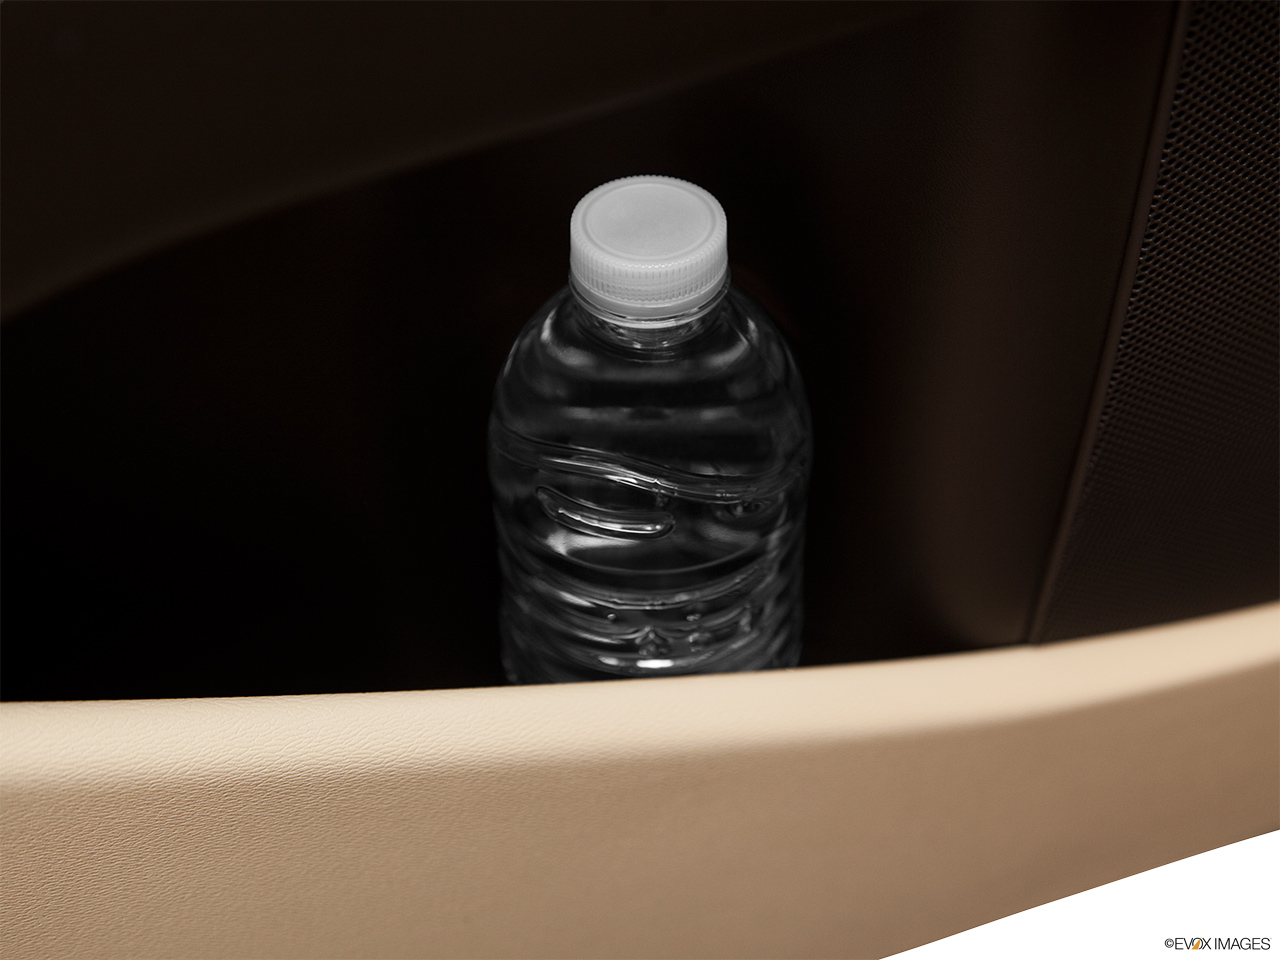 2012 Volvo XC70 3.2L Second row side cup holder with coffee prop, or second row door cup holder with water bottle. 